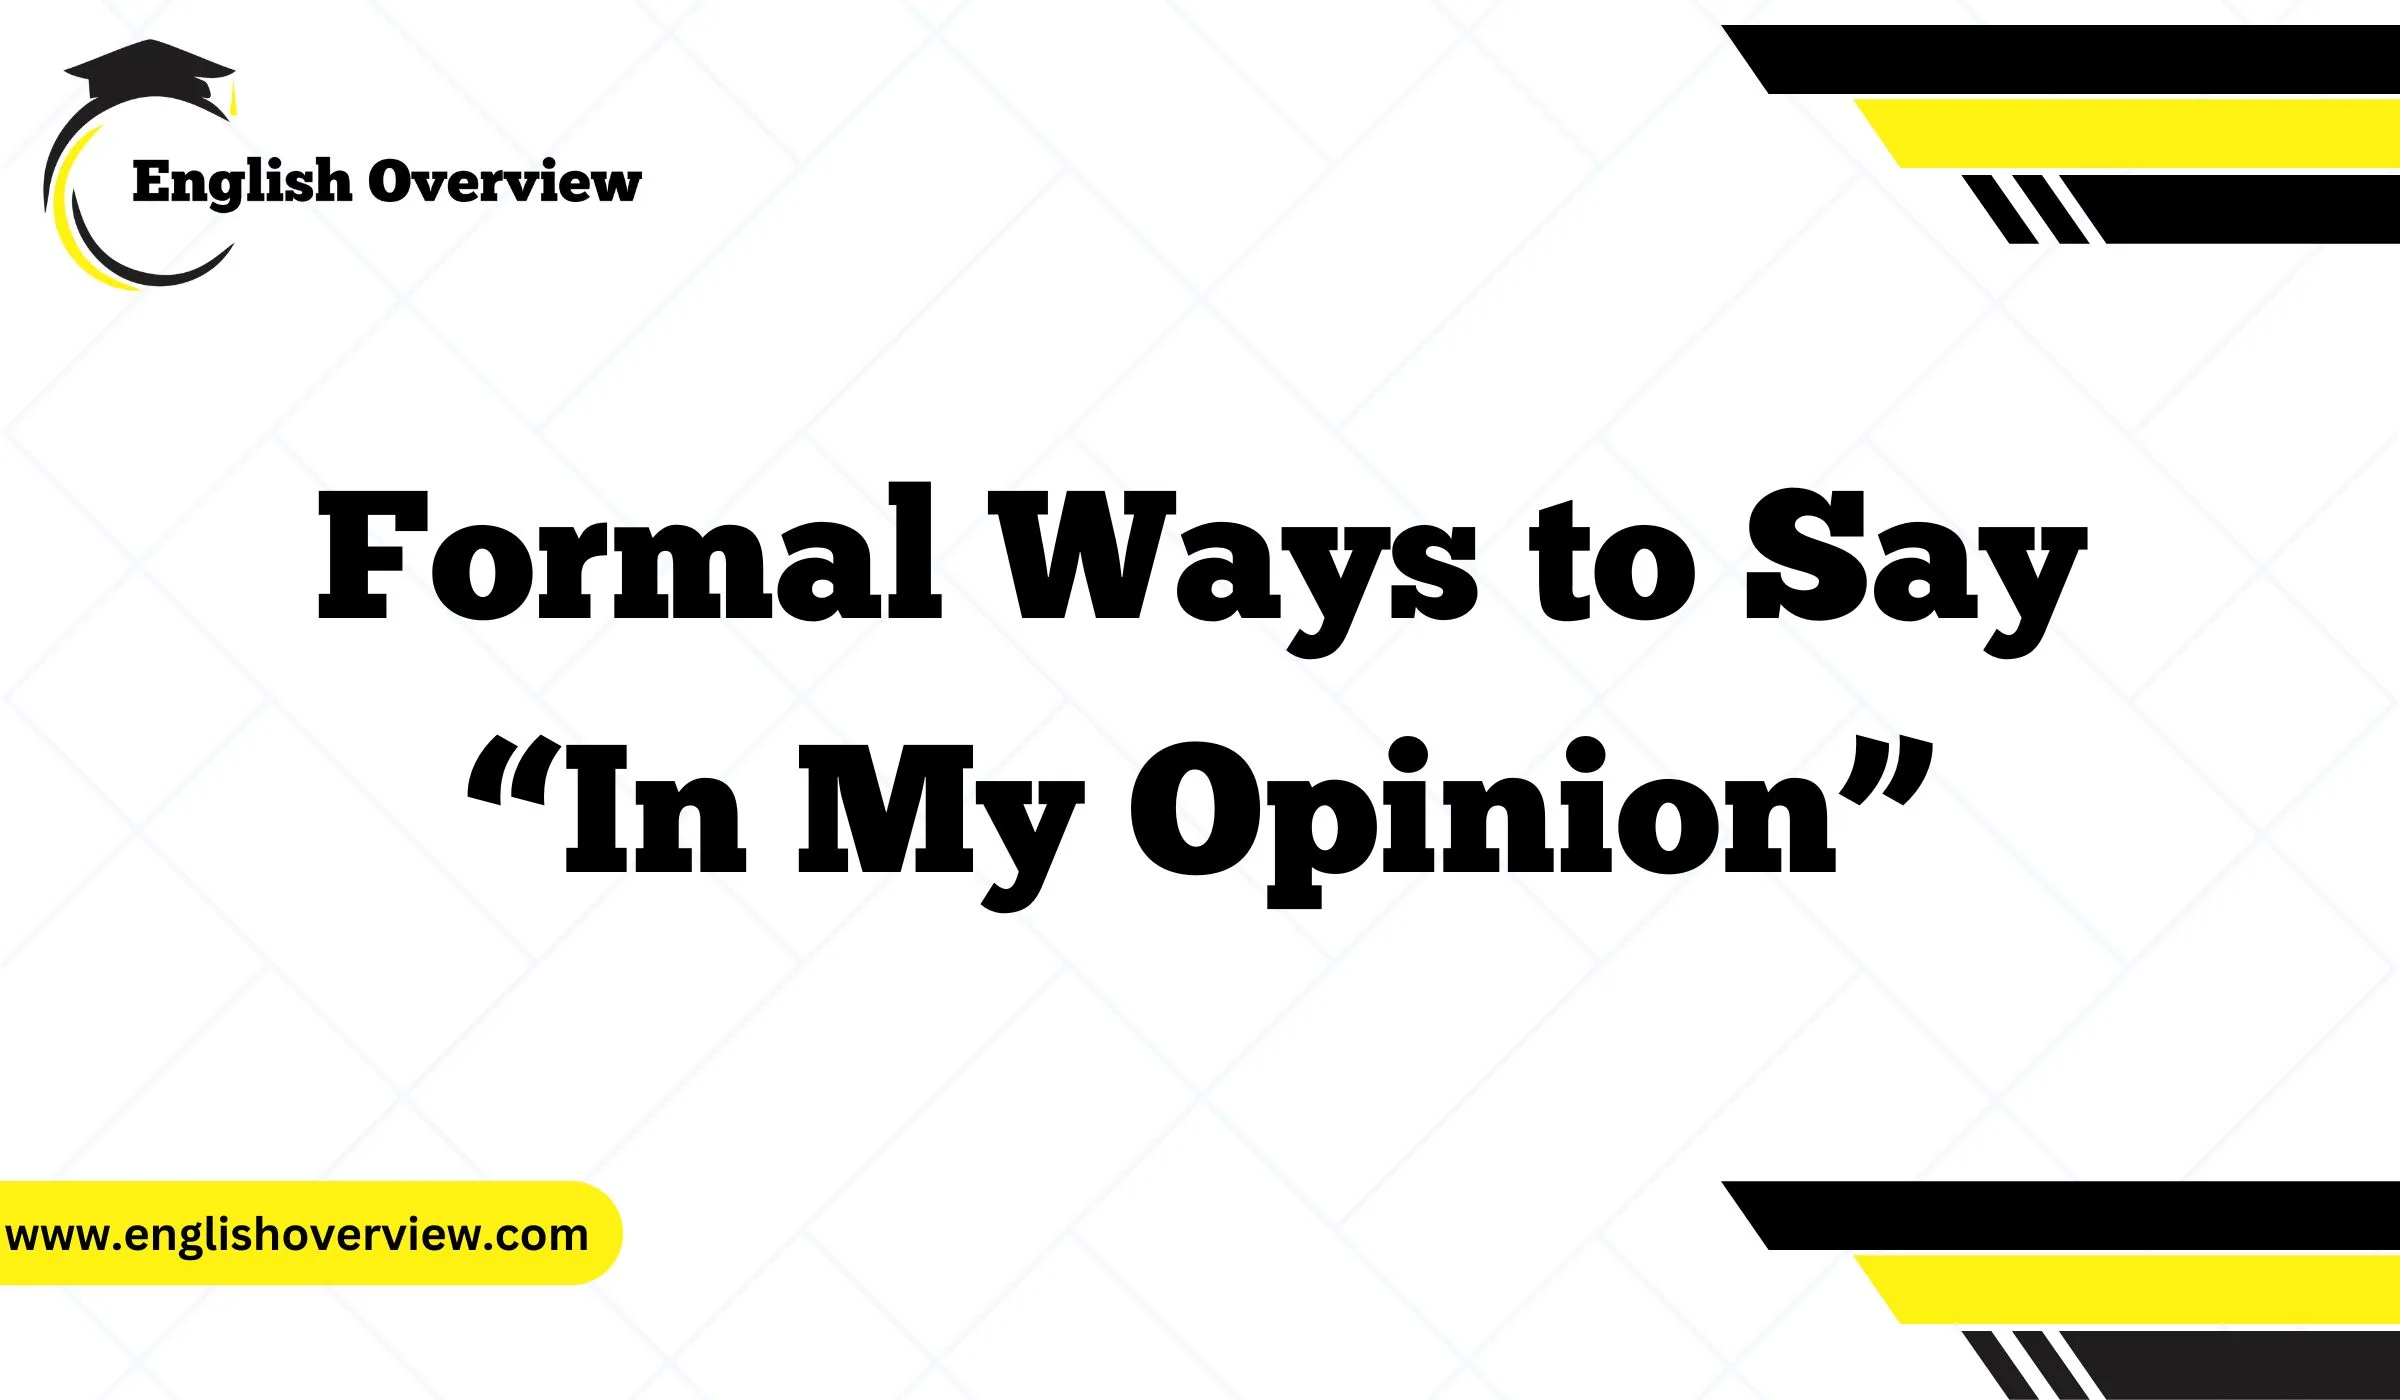 Formal Ways to Say “In My Opinion”